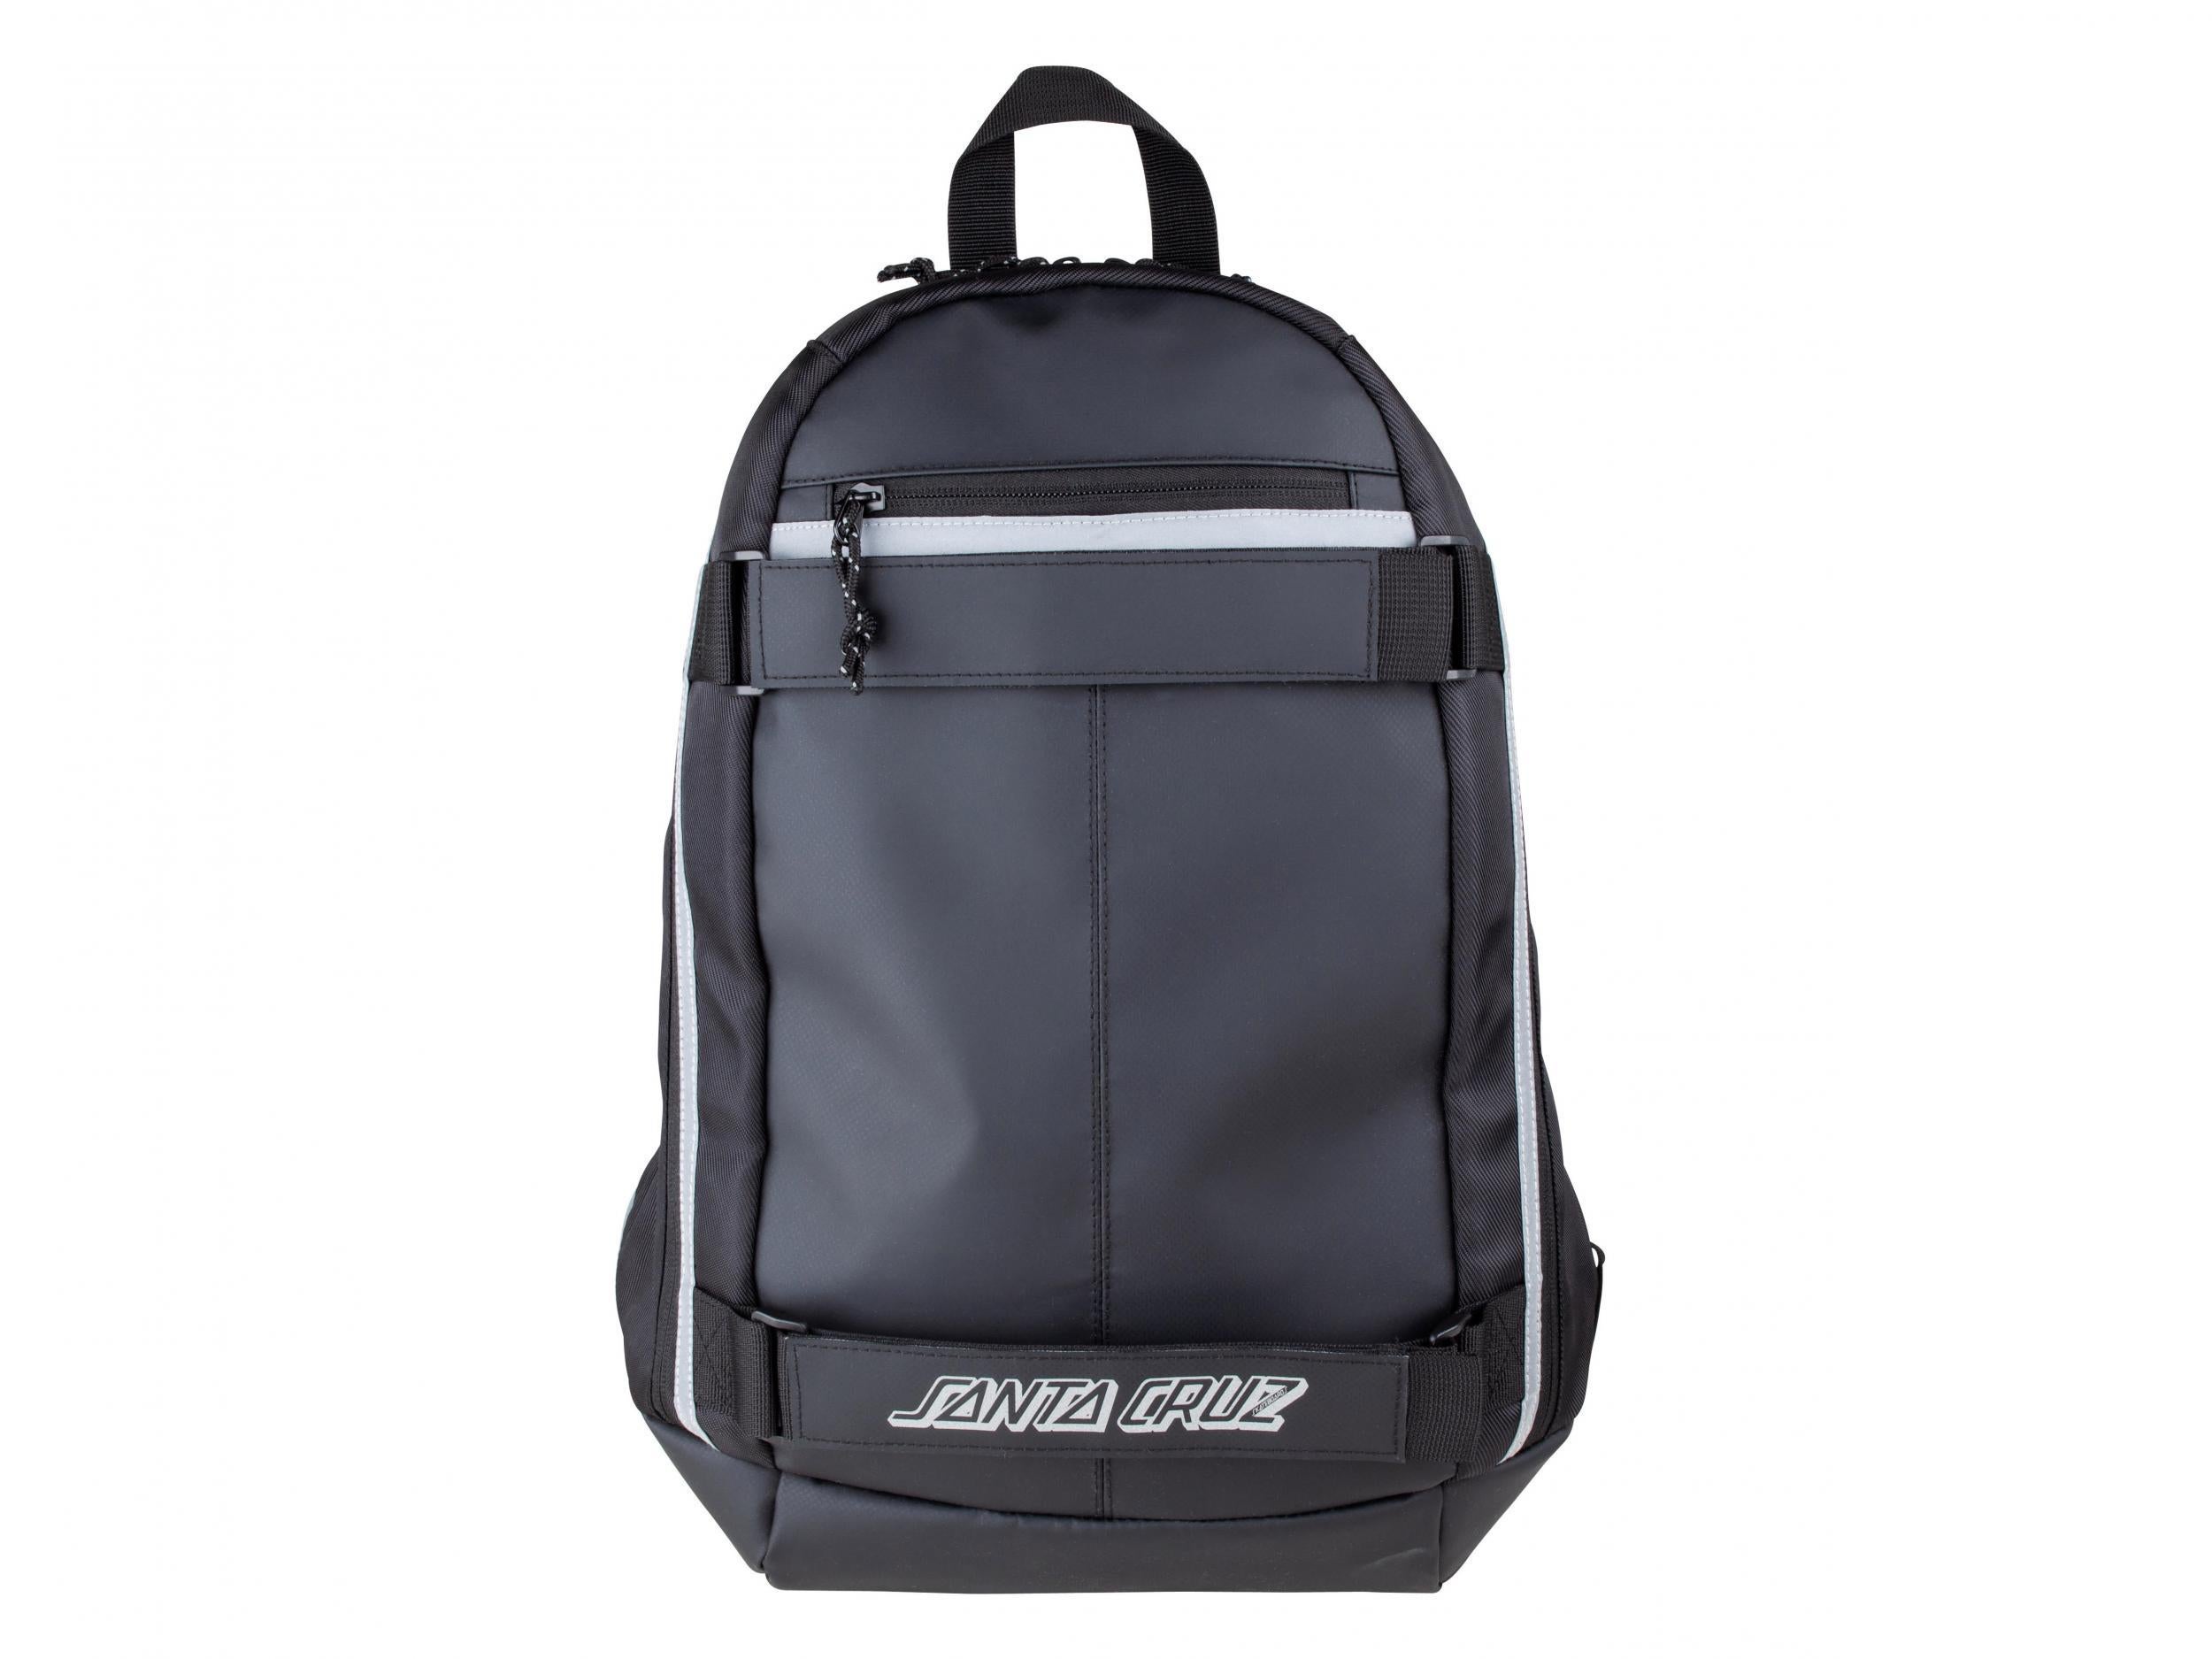 This smart style is ideal for carrying heavier items such as revision textbooks and laptops (Santa Cruz)